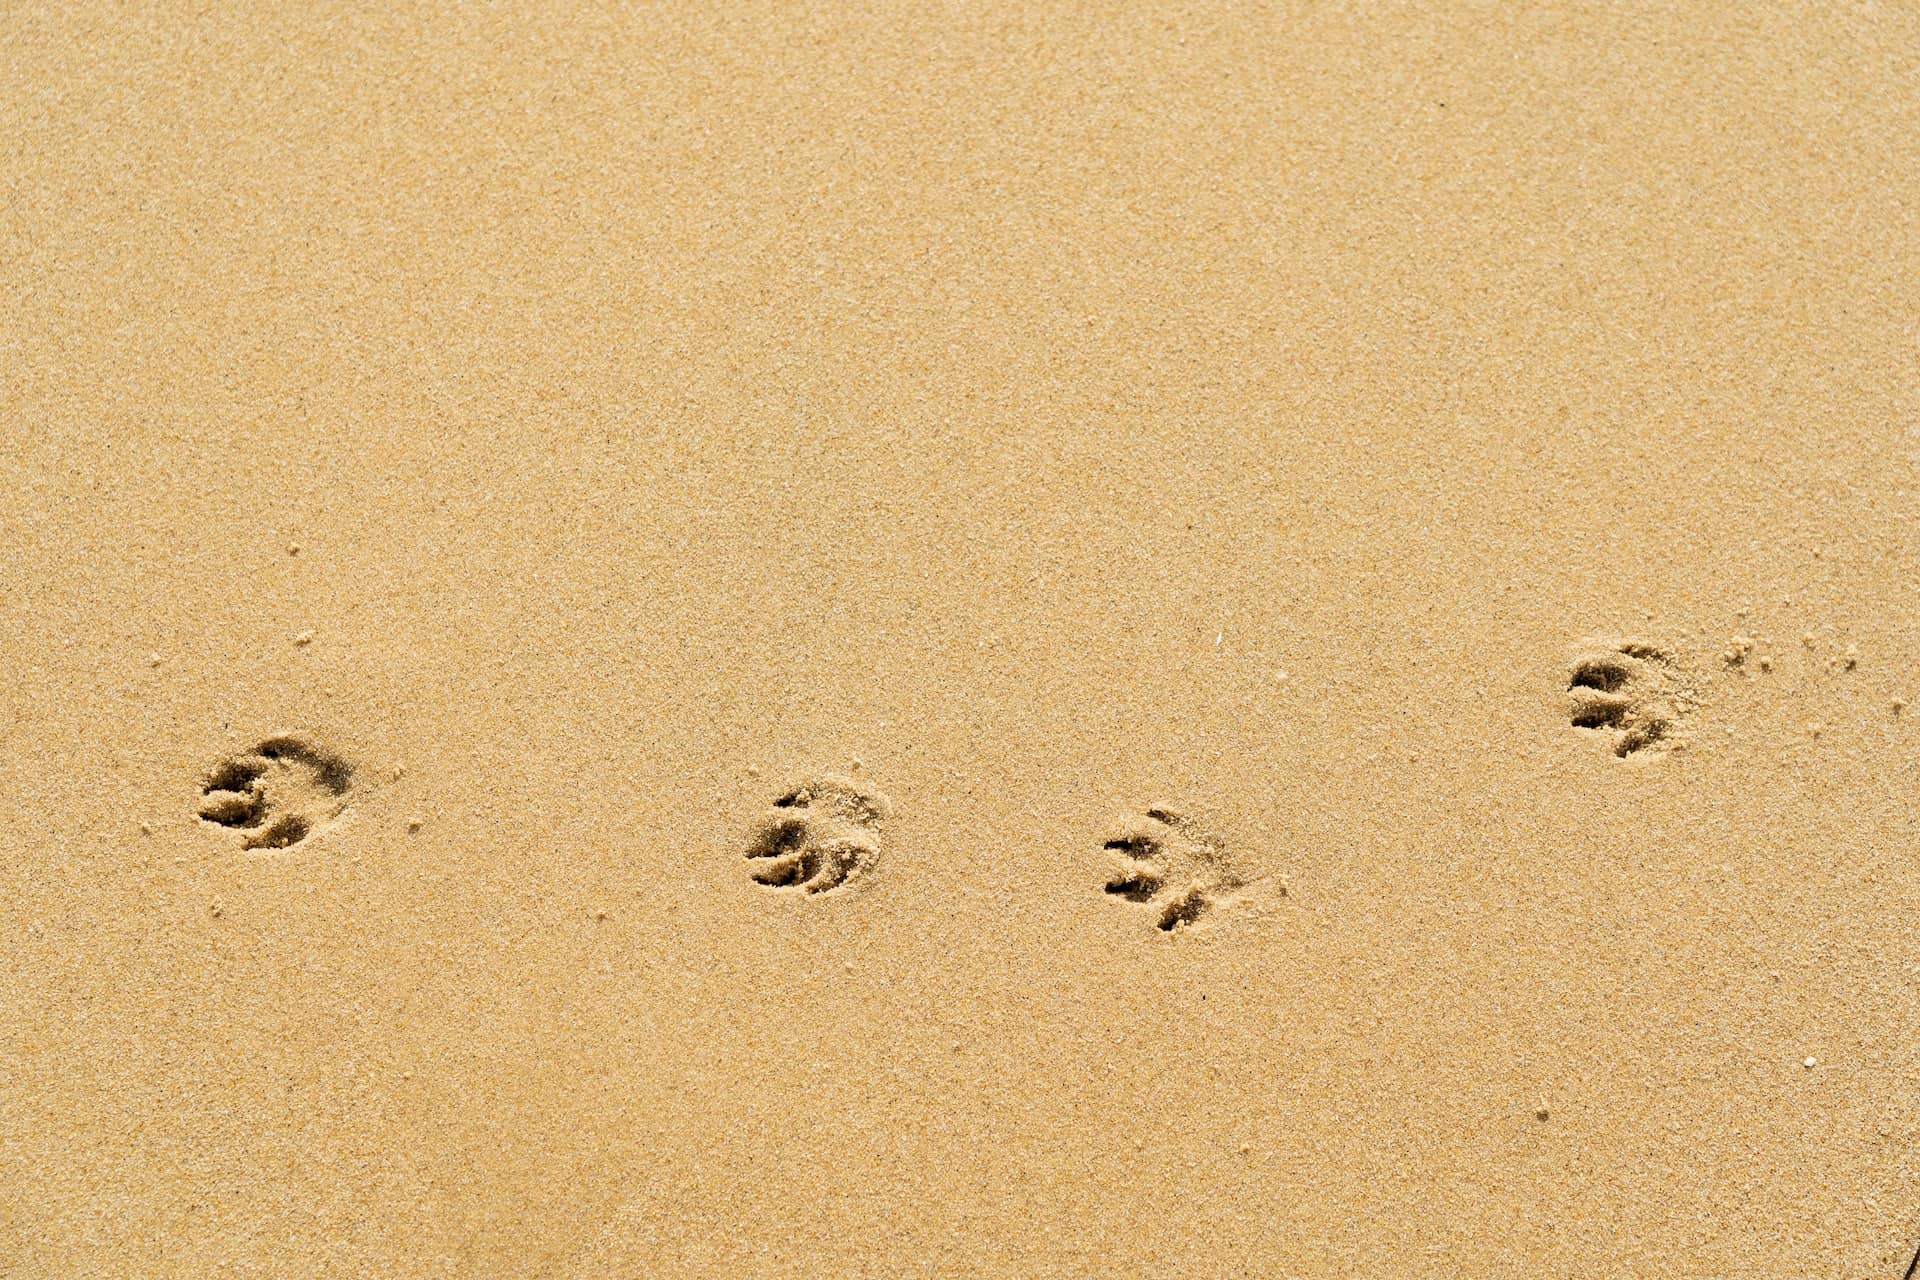 Dog paws in sand